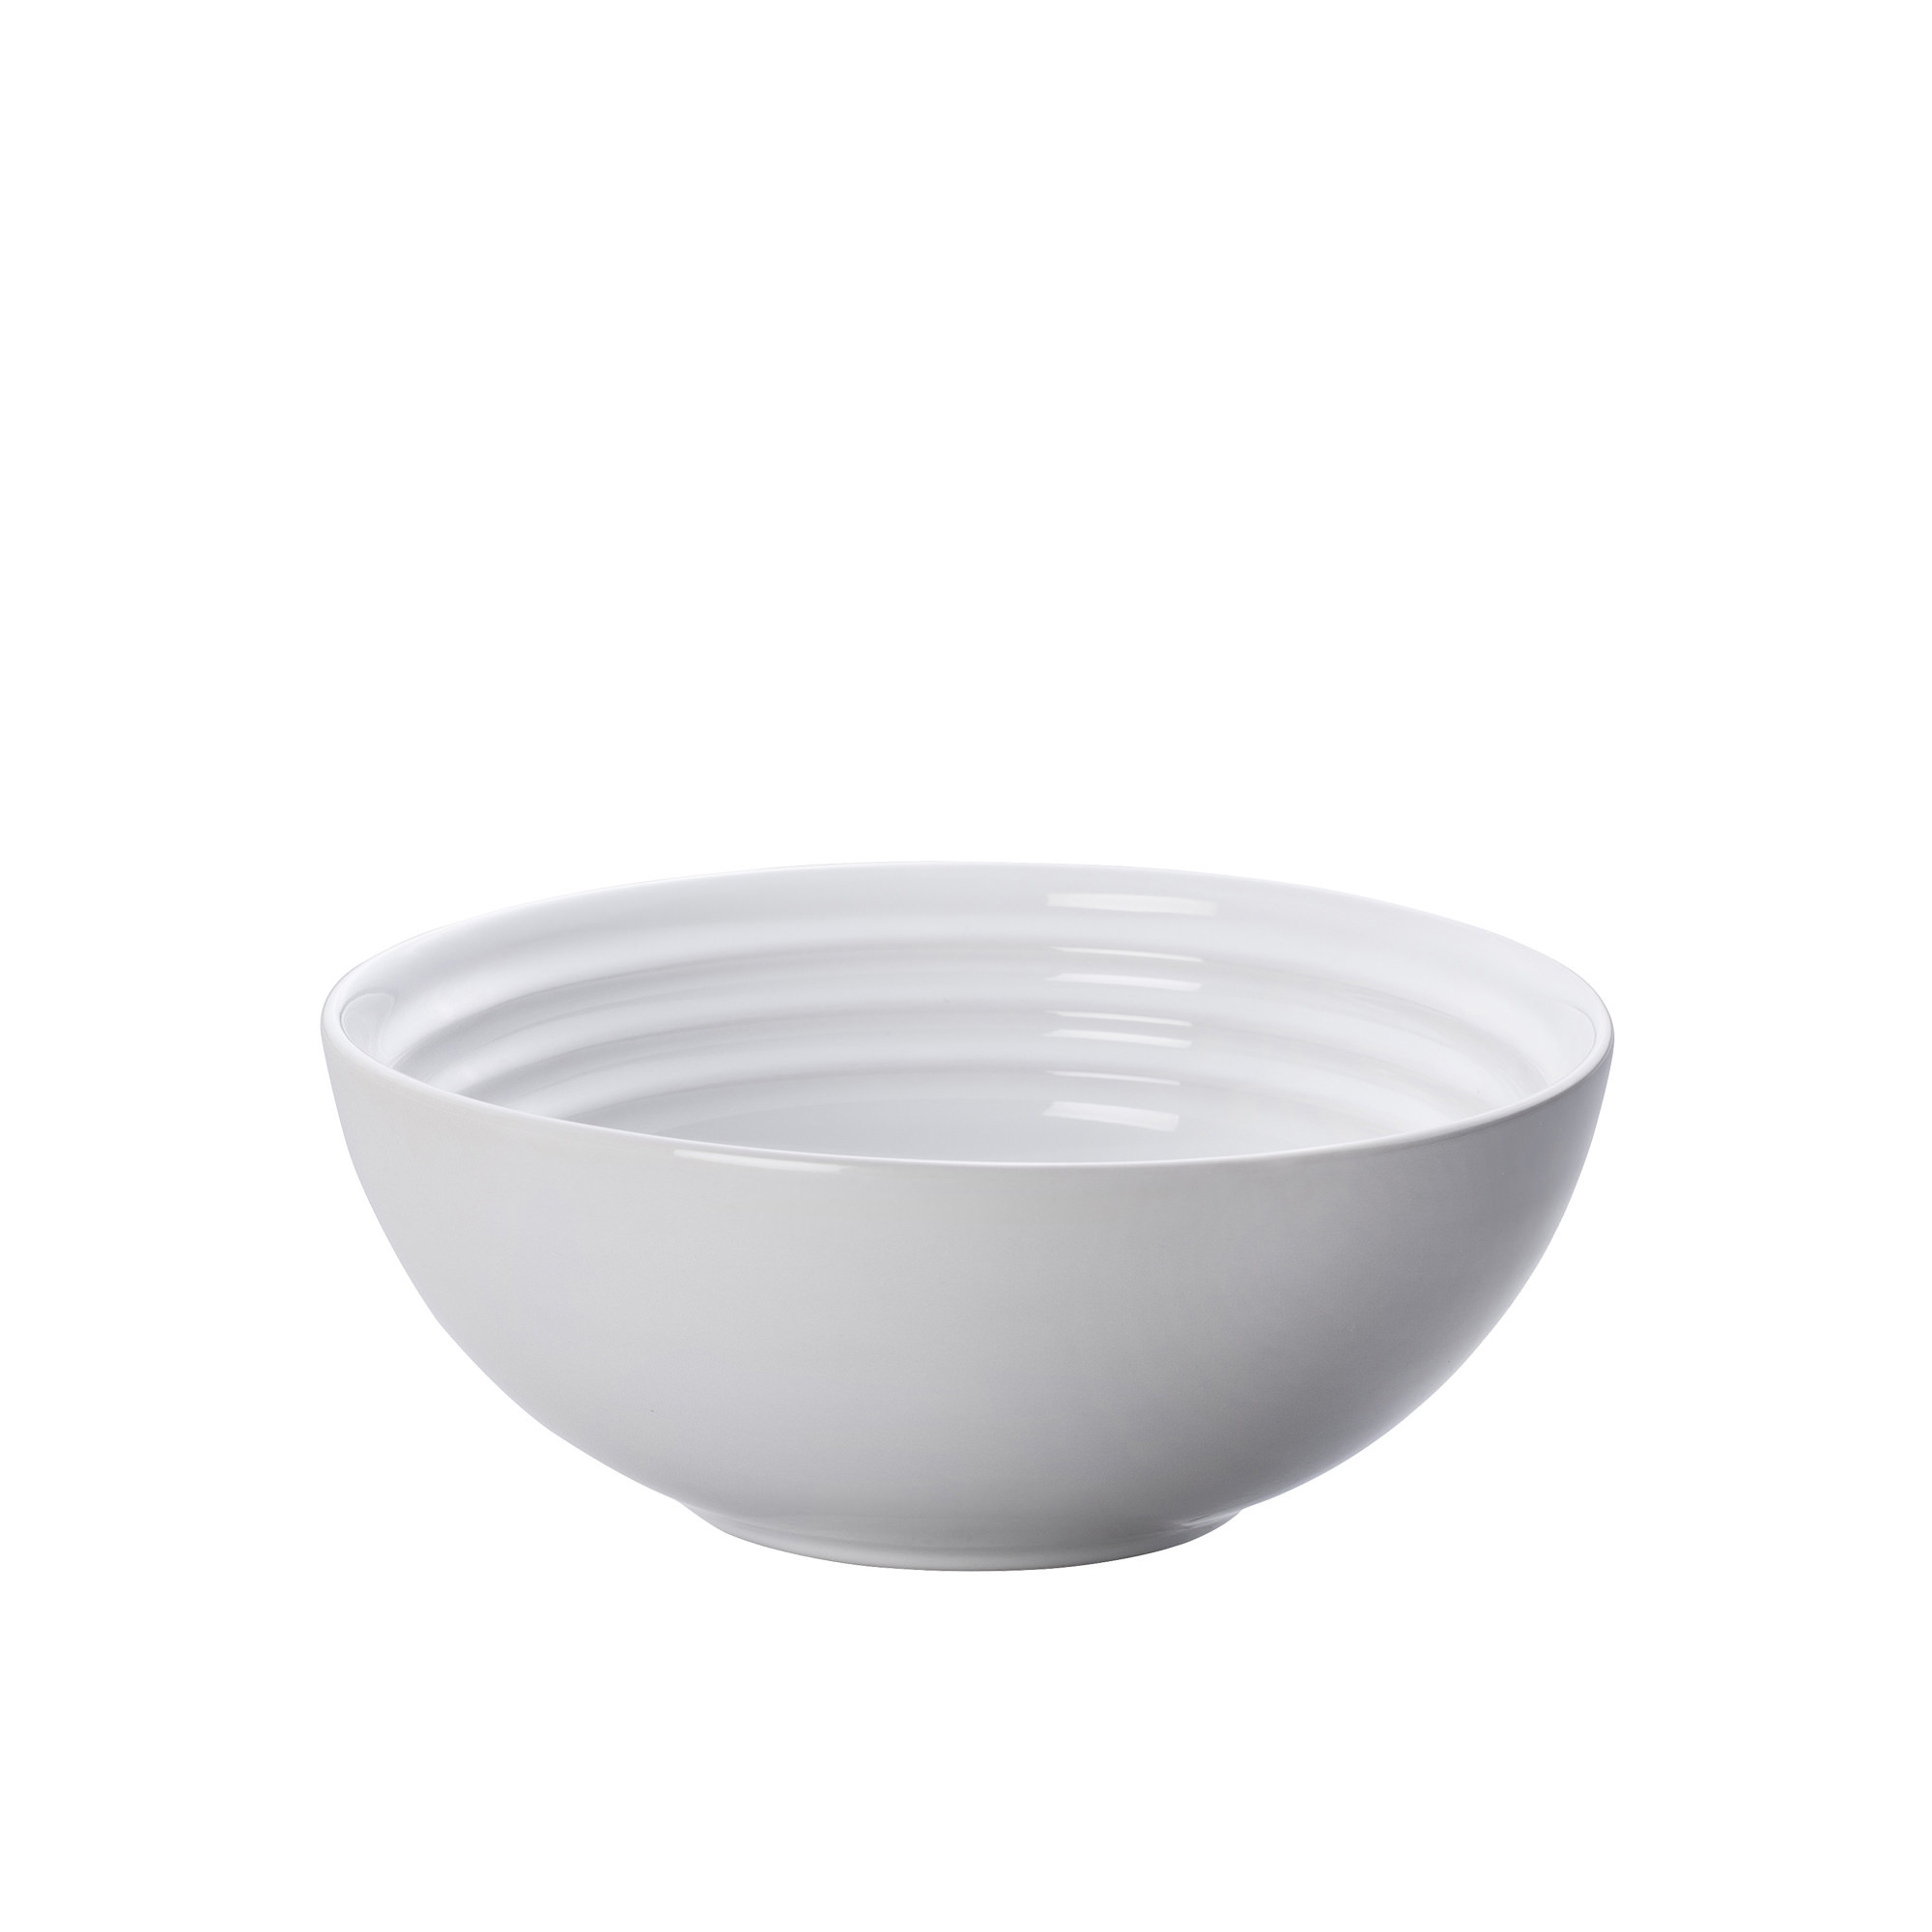 Le Creuset Stoneware Cereal Bowl Set of 4 White Image 2